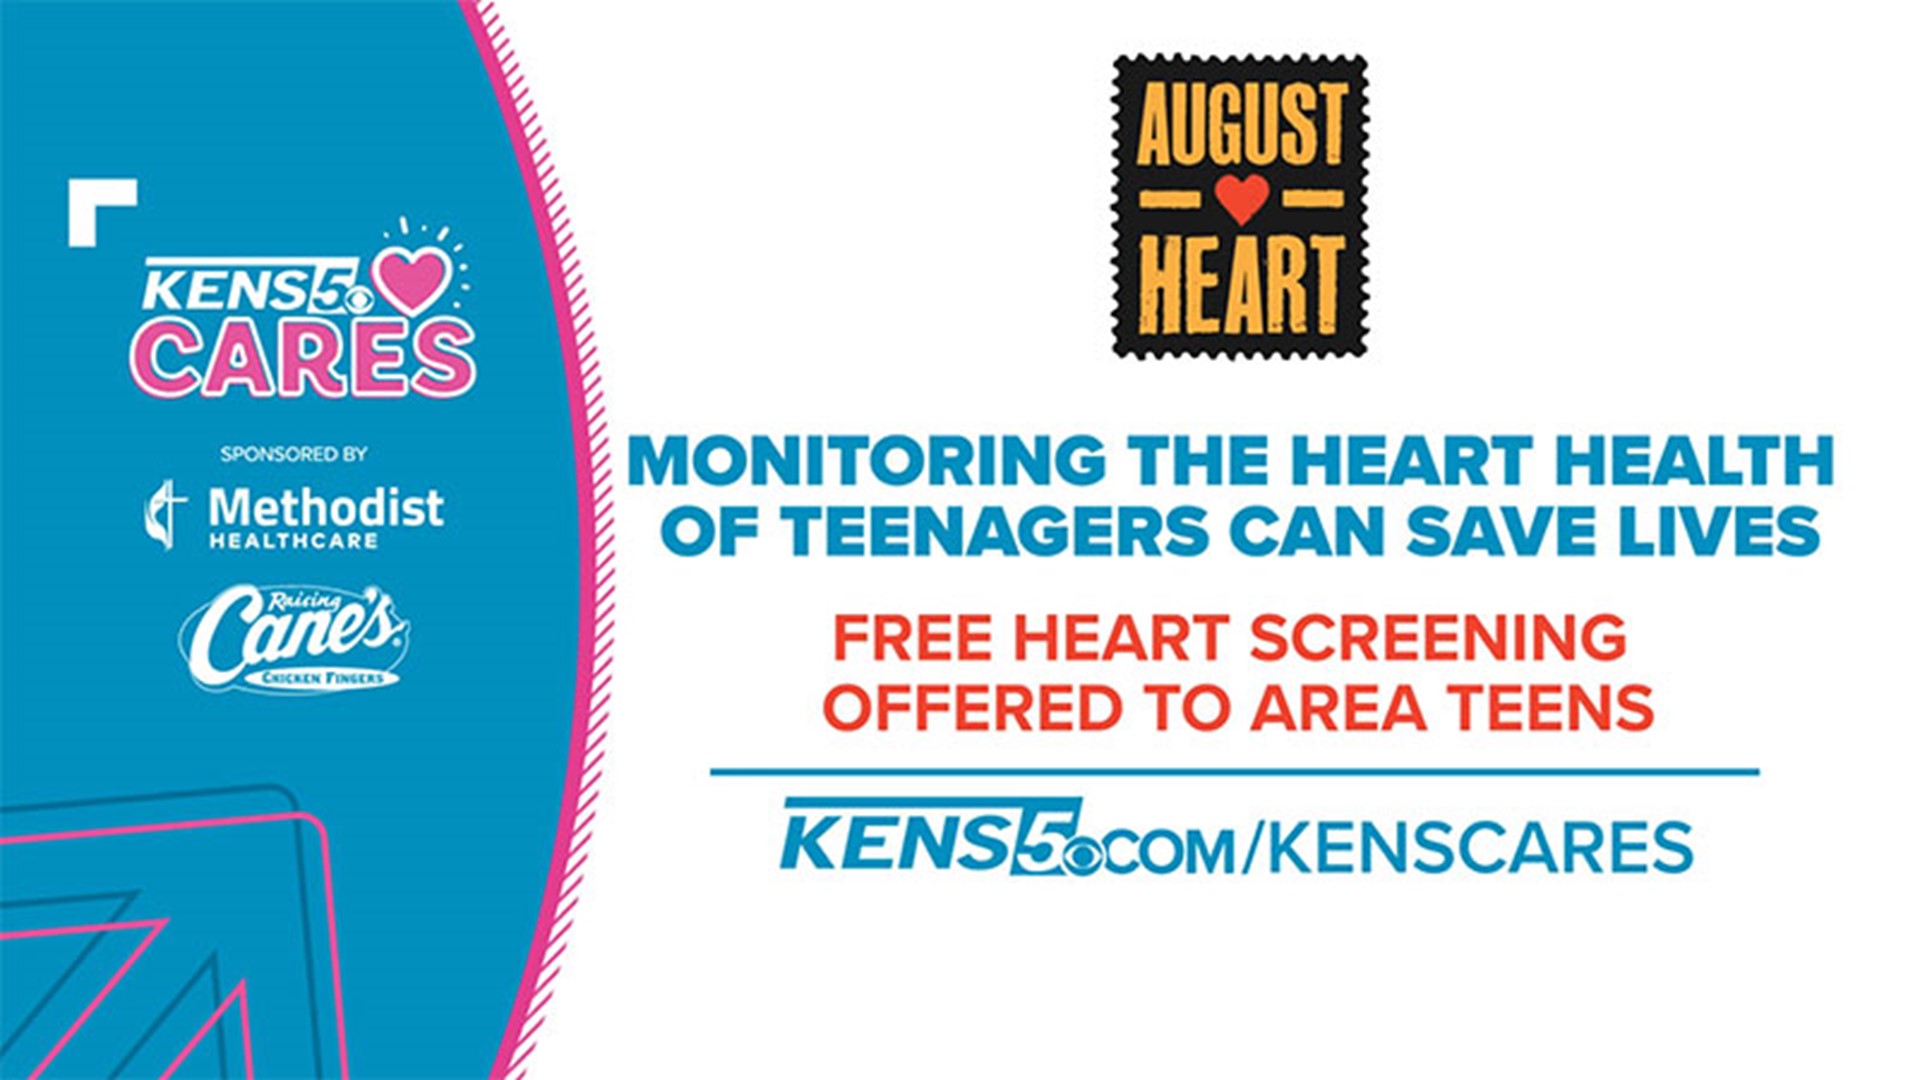 AugustHeart provides free heart screenings for teens in an effort to reduce sudden cardiac deaths.